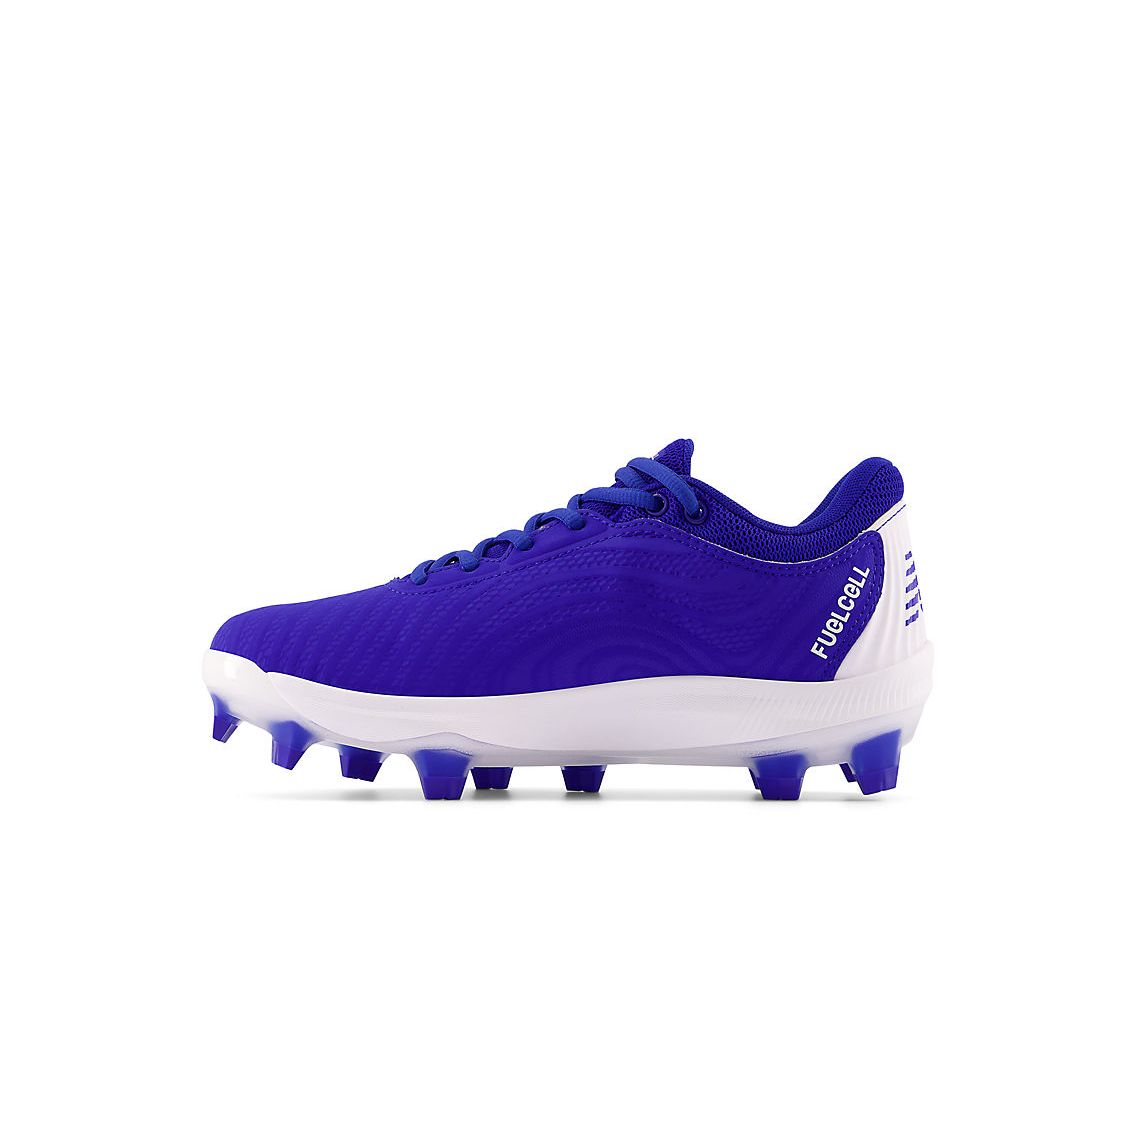 New Balance Women's FuelCell FUSE v4 Molded Fastpitch Softball Cleats - Team Royal/Optic White - SPFUSEB4